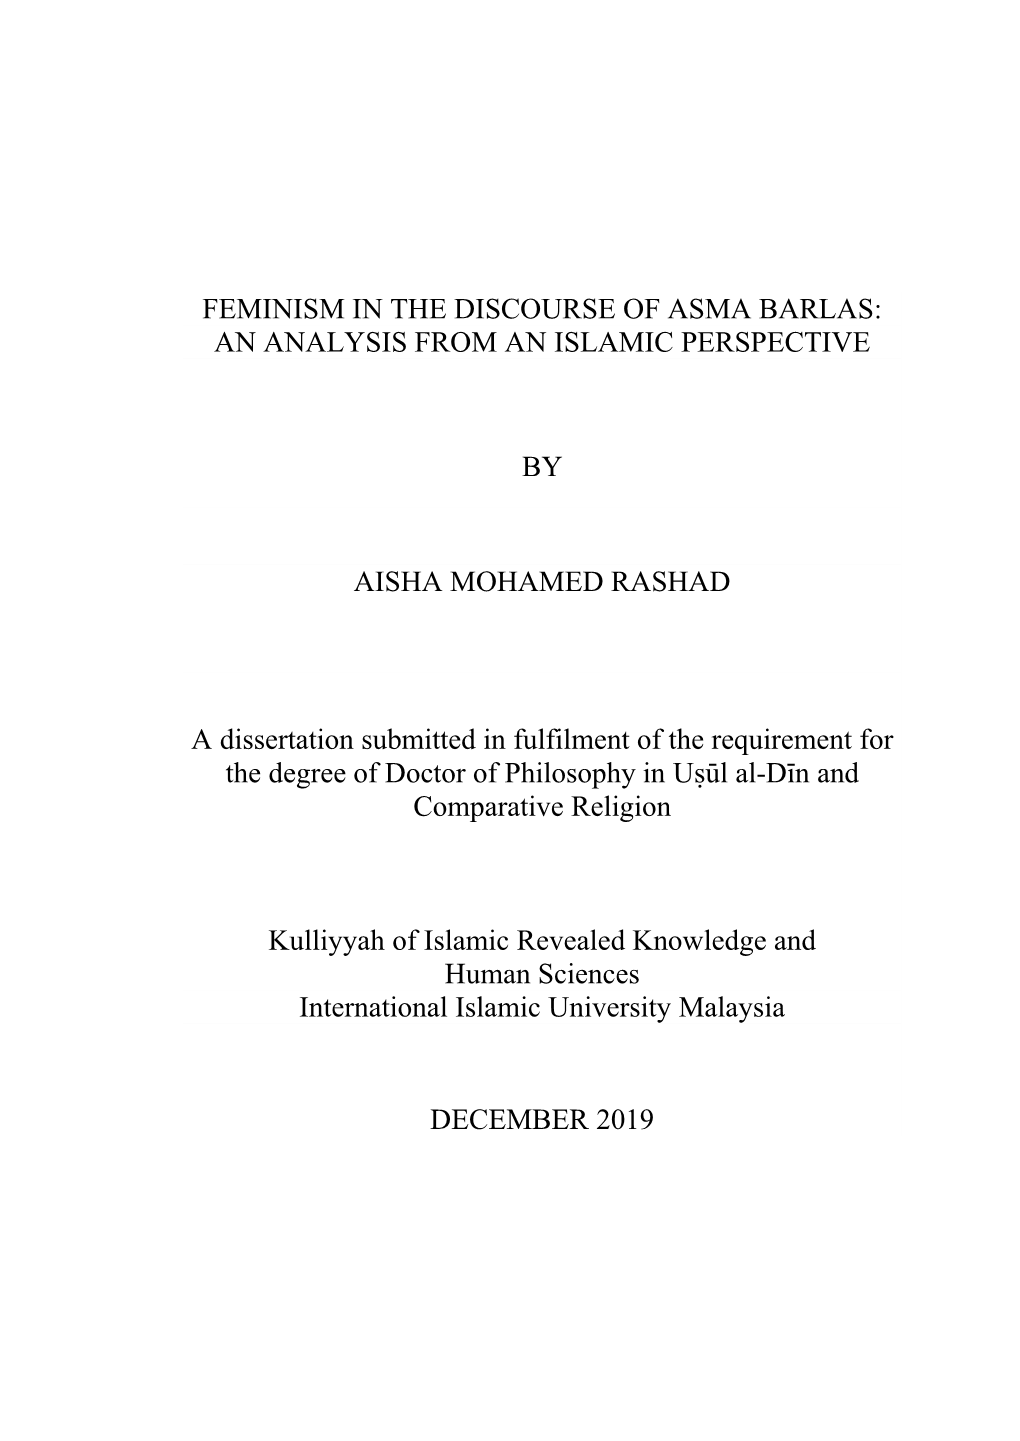 Feminism in the Discourse of Asma Barlas: an Analysis from an Islamic Perspective